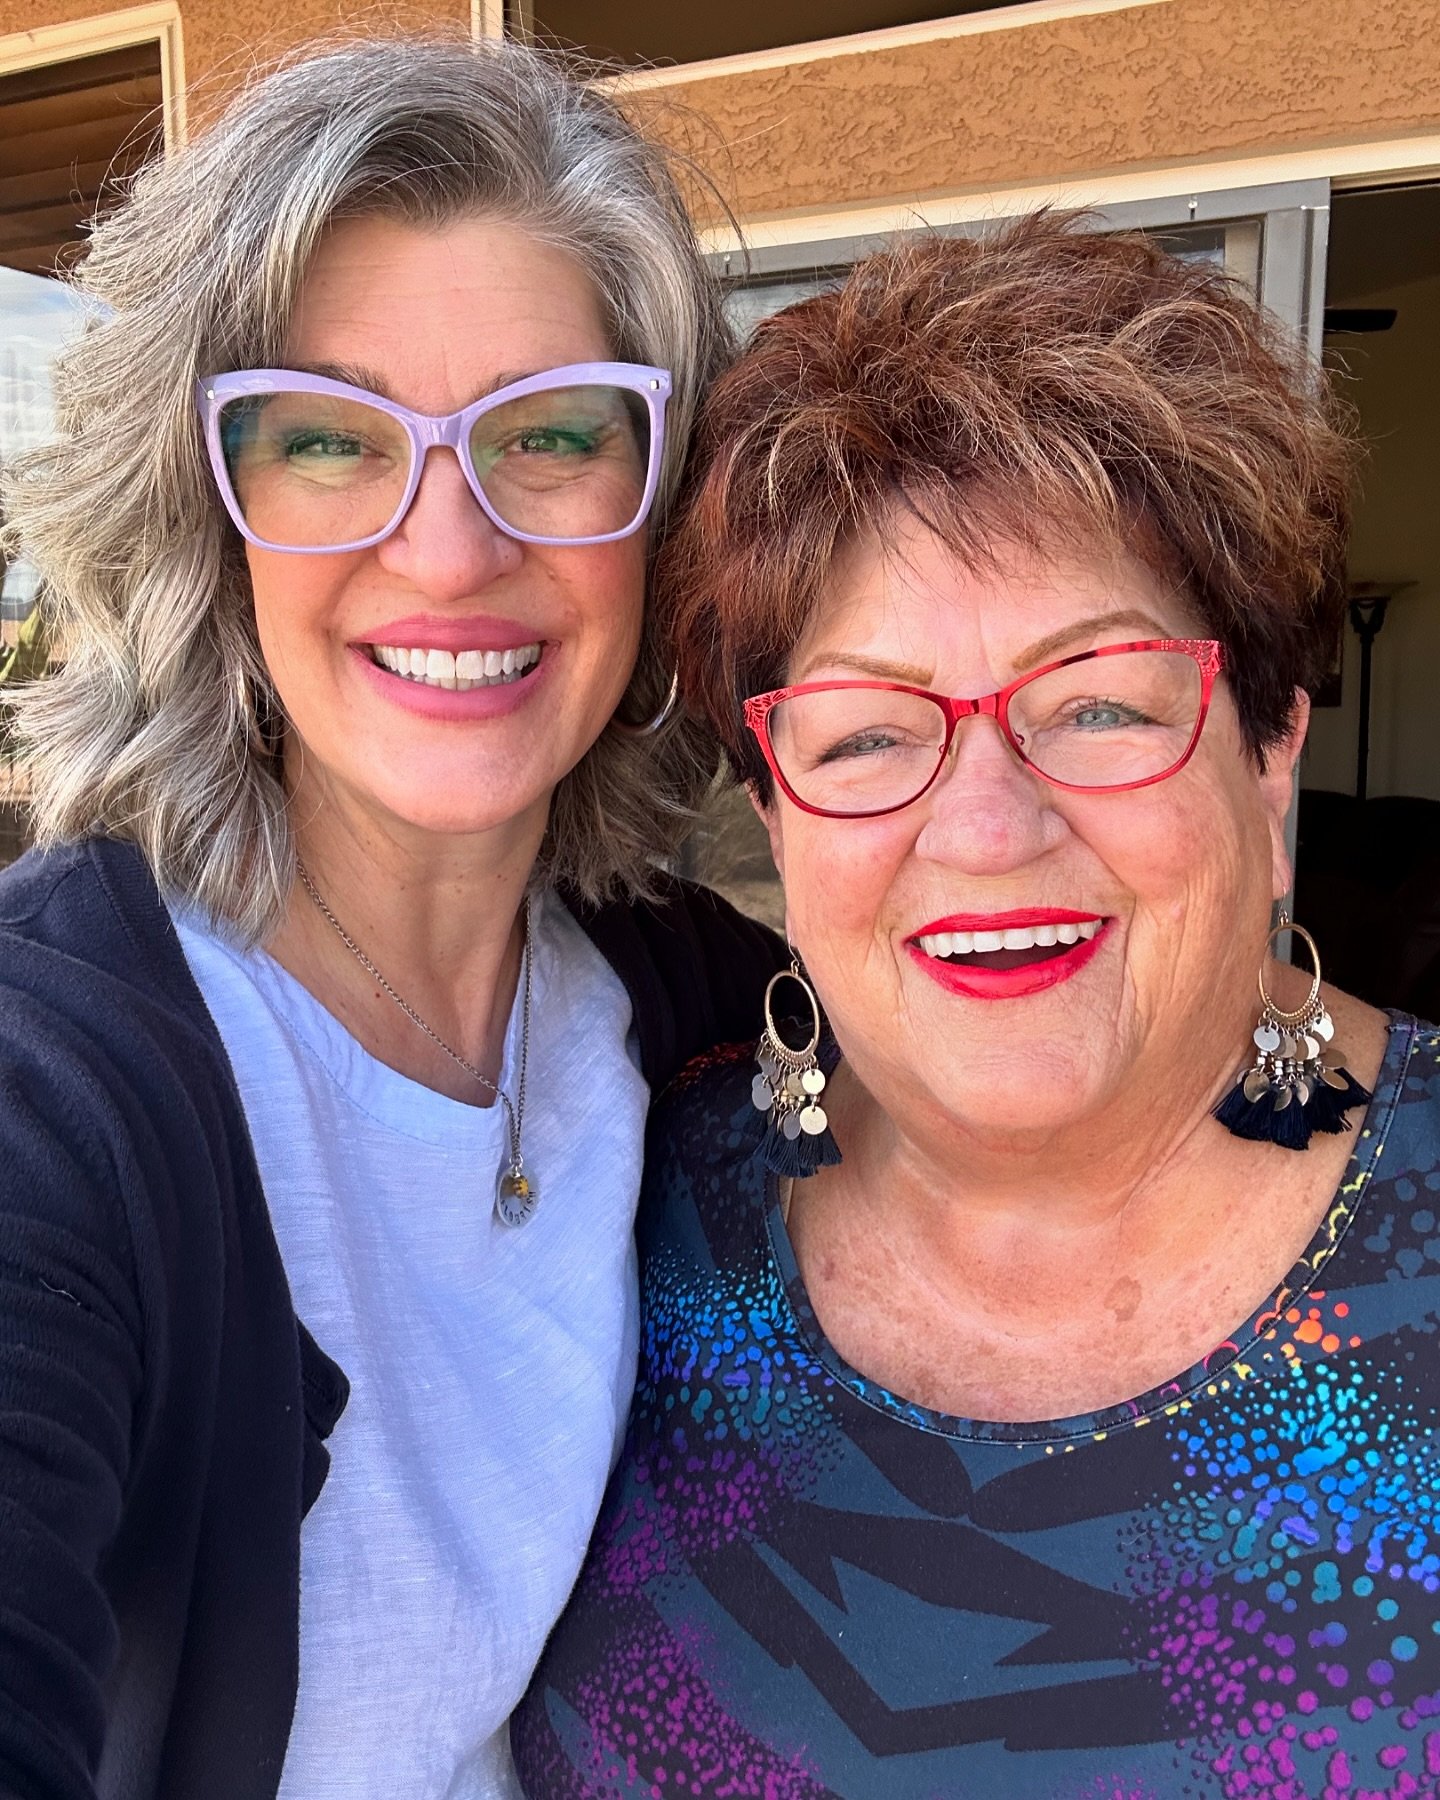 I&rsquo;m one of the lucky ones!😃✨💞

I&rsquo;m blessed to love and be loved by my momma. We&rsquo;re best friends.

Today I celebrate her 79th Birthday and Mother&rsquo;s Day!🎉

Is she cute or what?

We are so much alike: gullible to the core, eas